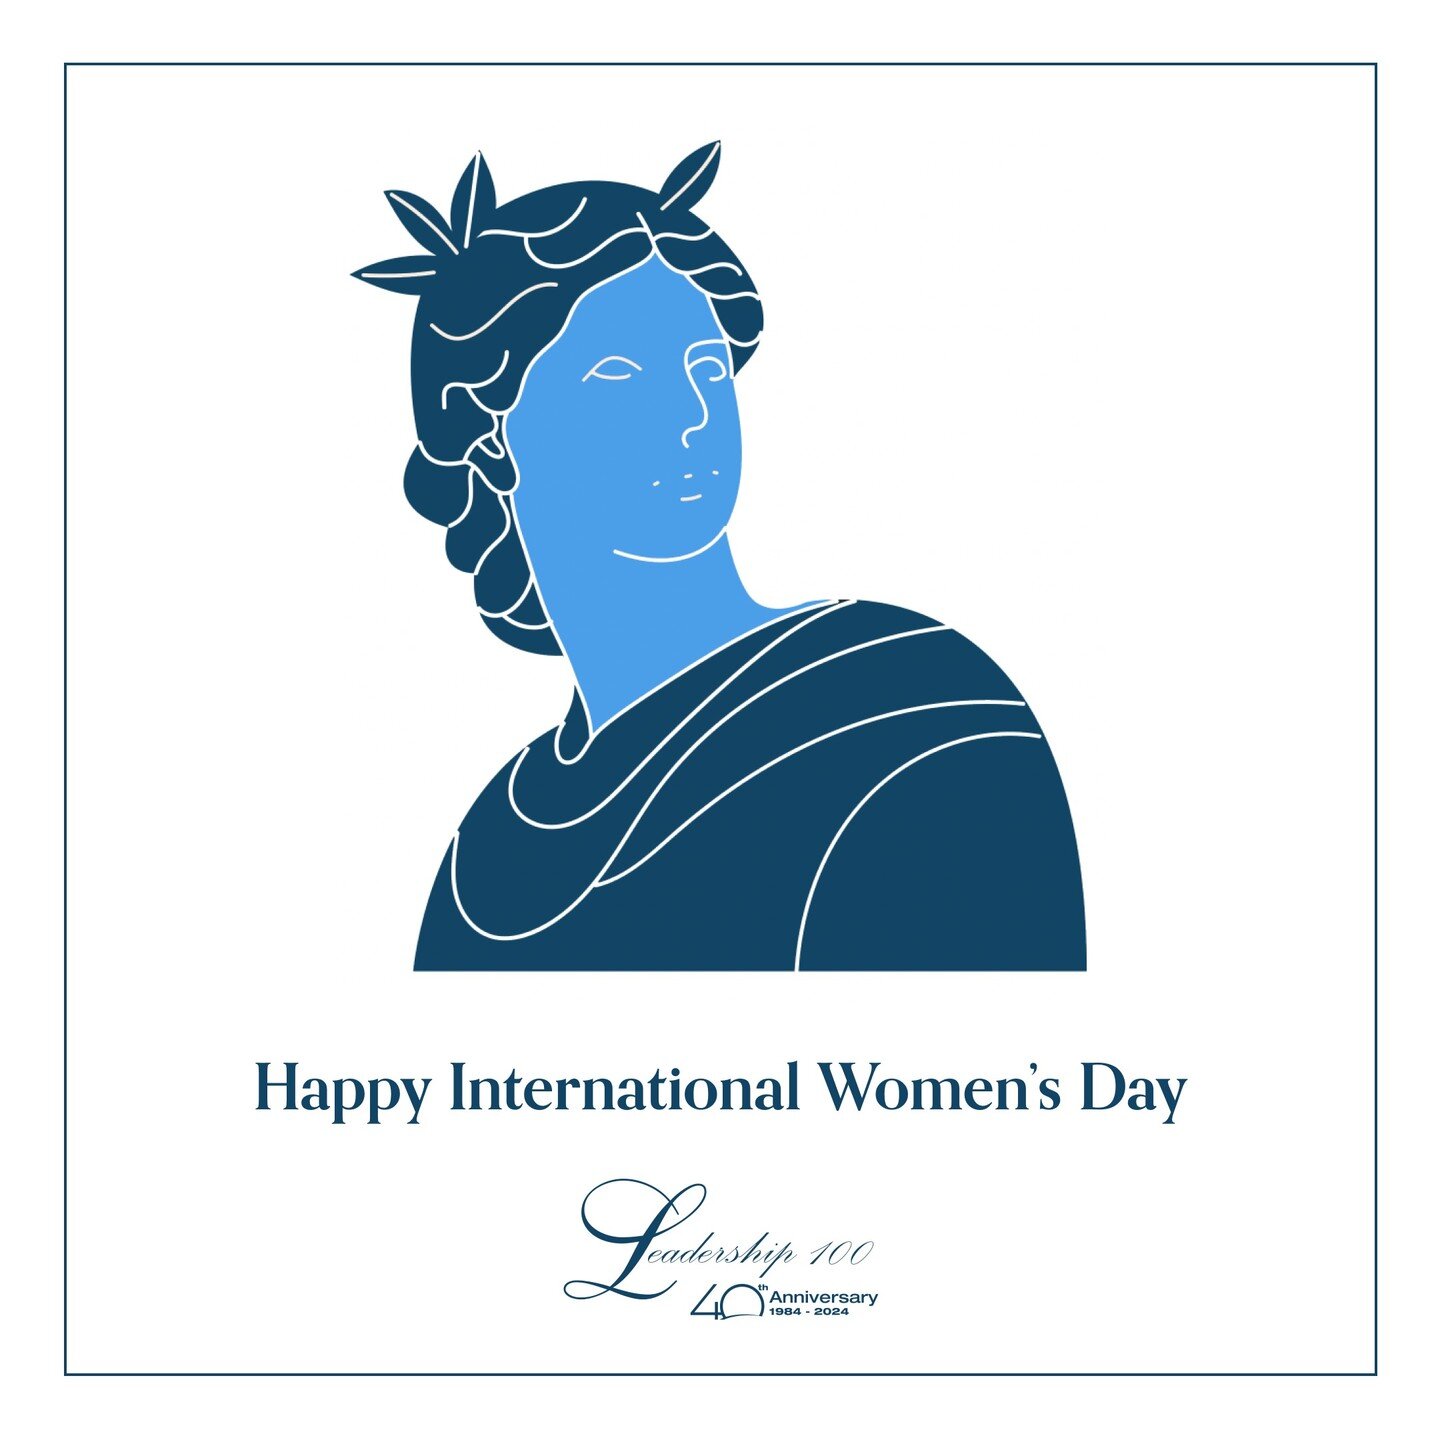 Happy International Women's Day from Leadership 100! 

At Leadership 100, we recognize the invaluable role that women play in every aspect of society. Their strength, determination, and passion are the driving forces behind progress and innovation.

